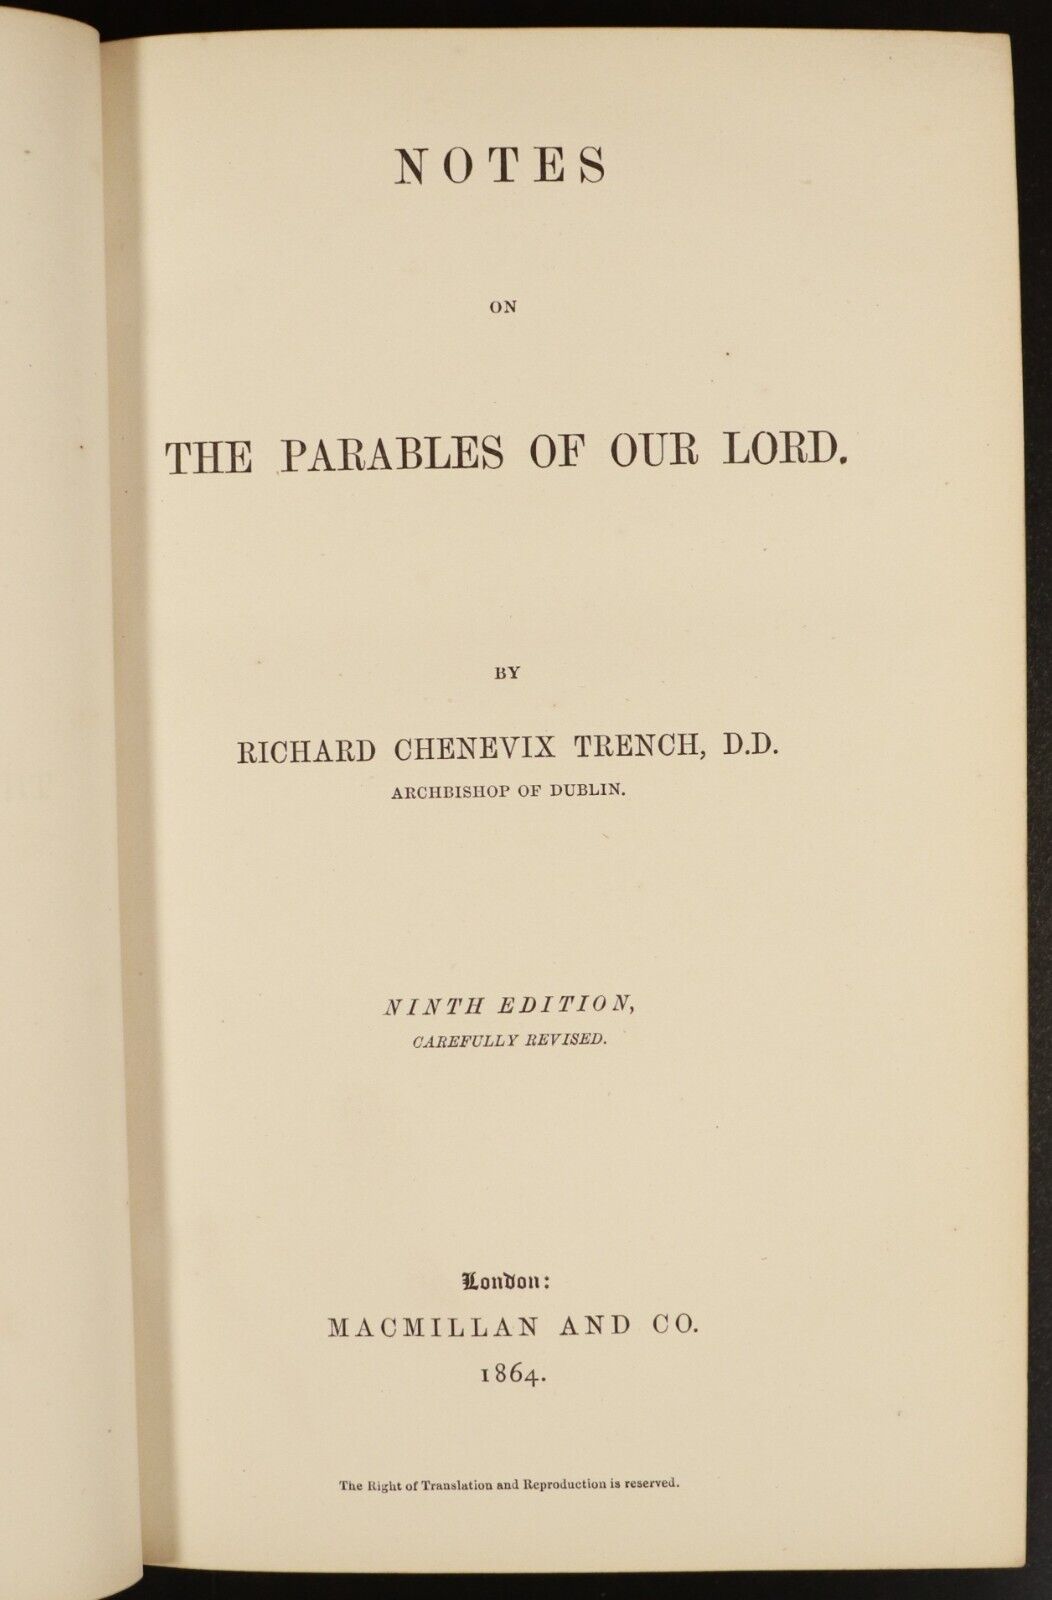 1864 Notes On The Parables Of Our Lord by R.C. Trench Antiquarian Theology Book - 0